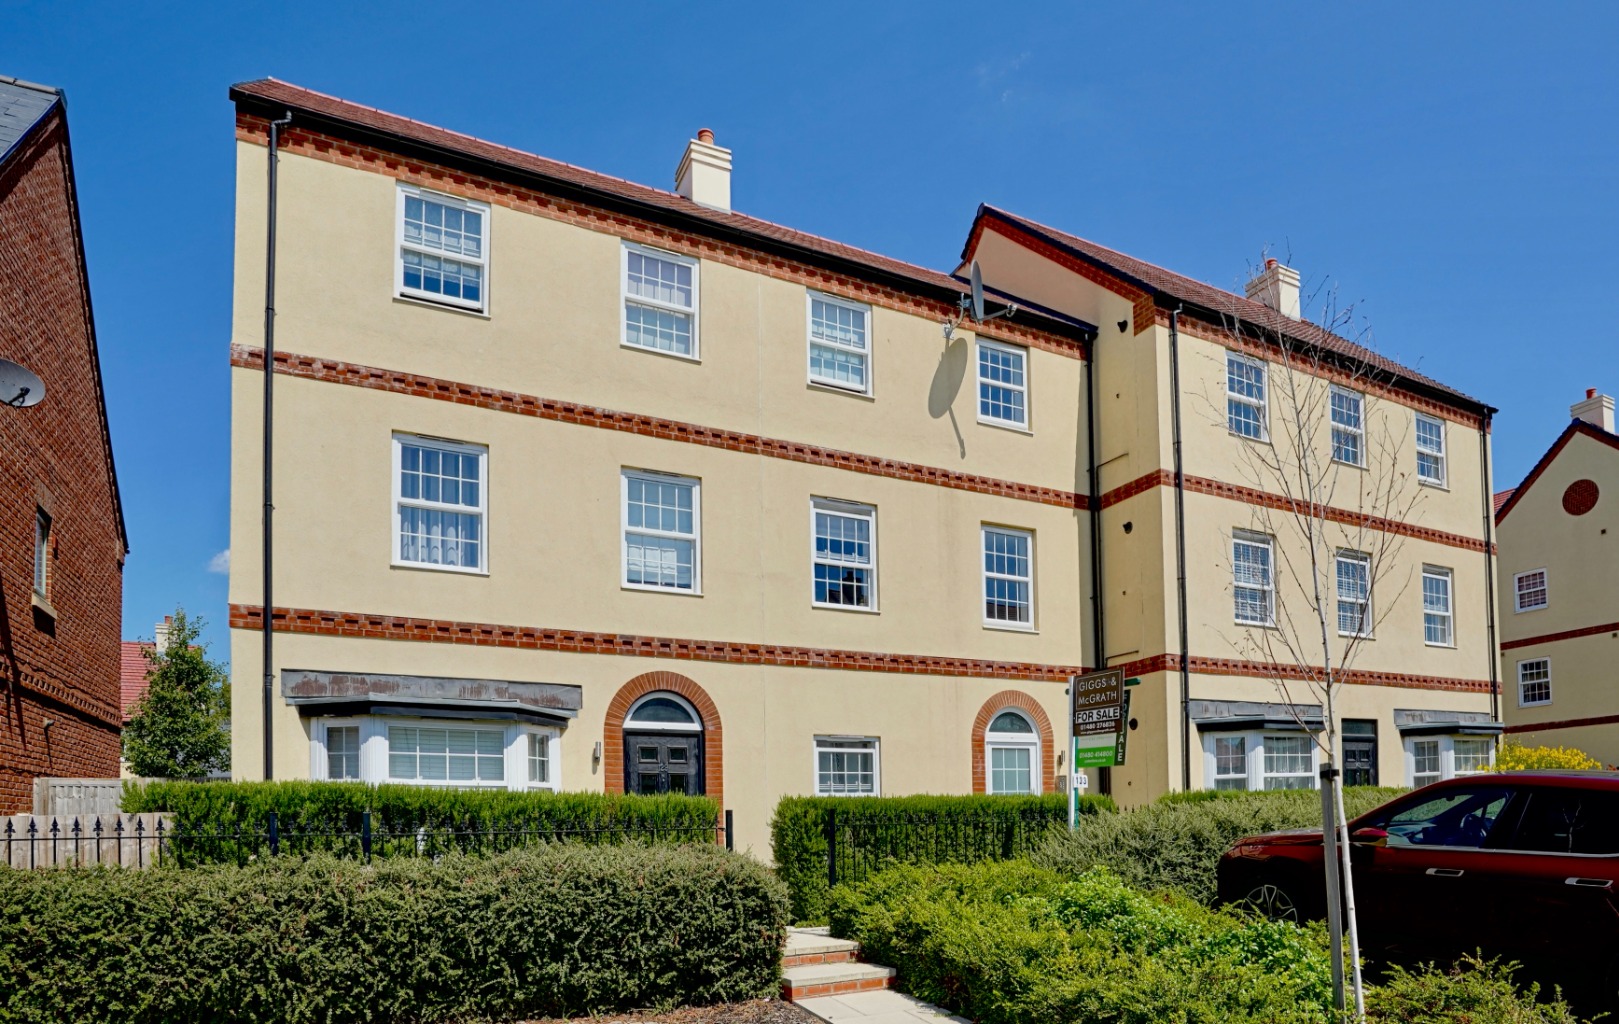 2 bed flat for sale in Walston Way, Huntingdon - Property Image 1